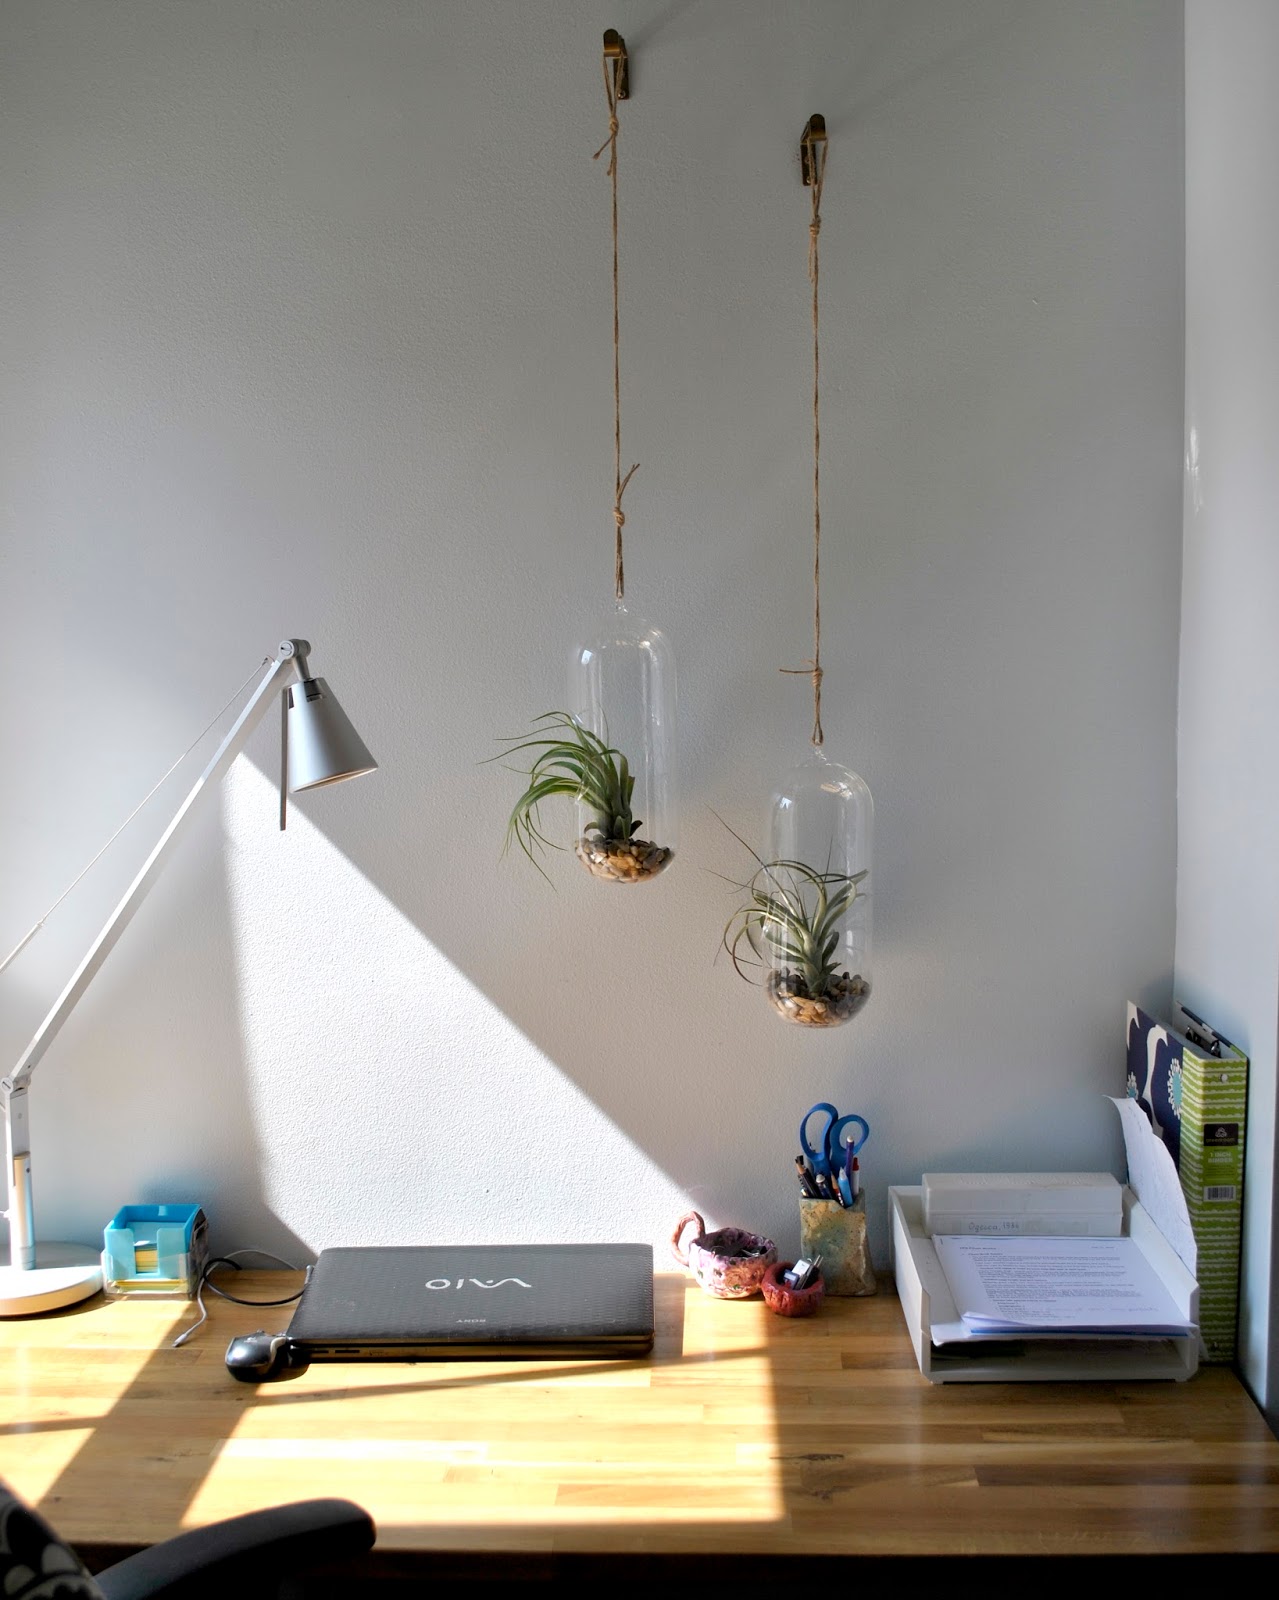 forty-two roads: Desk Air Plants